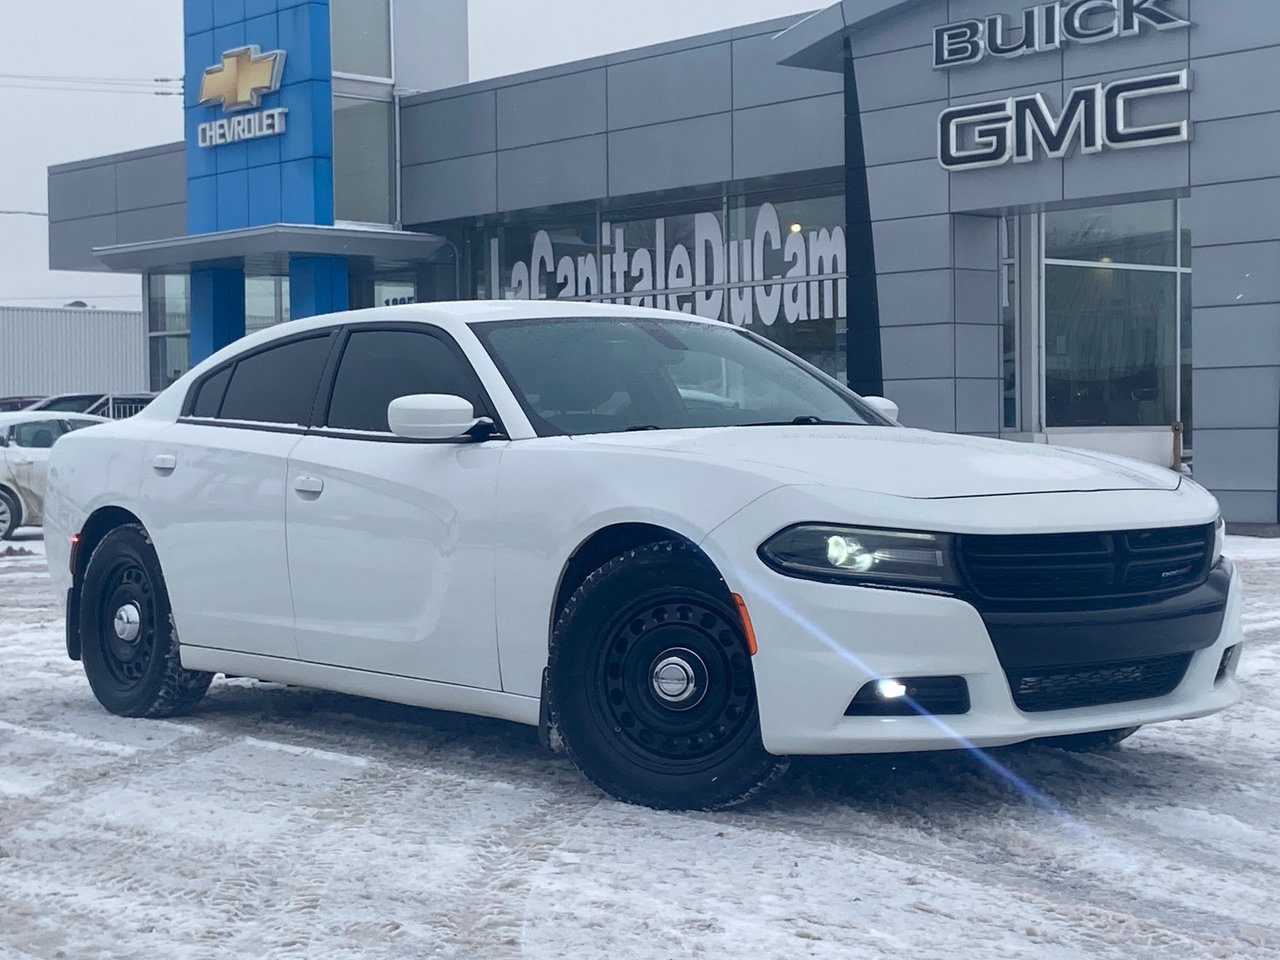 Dodge Charger 2016 Police